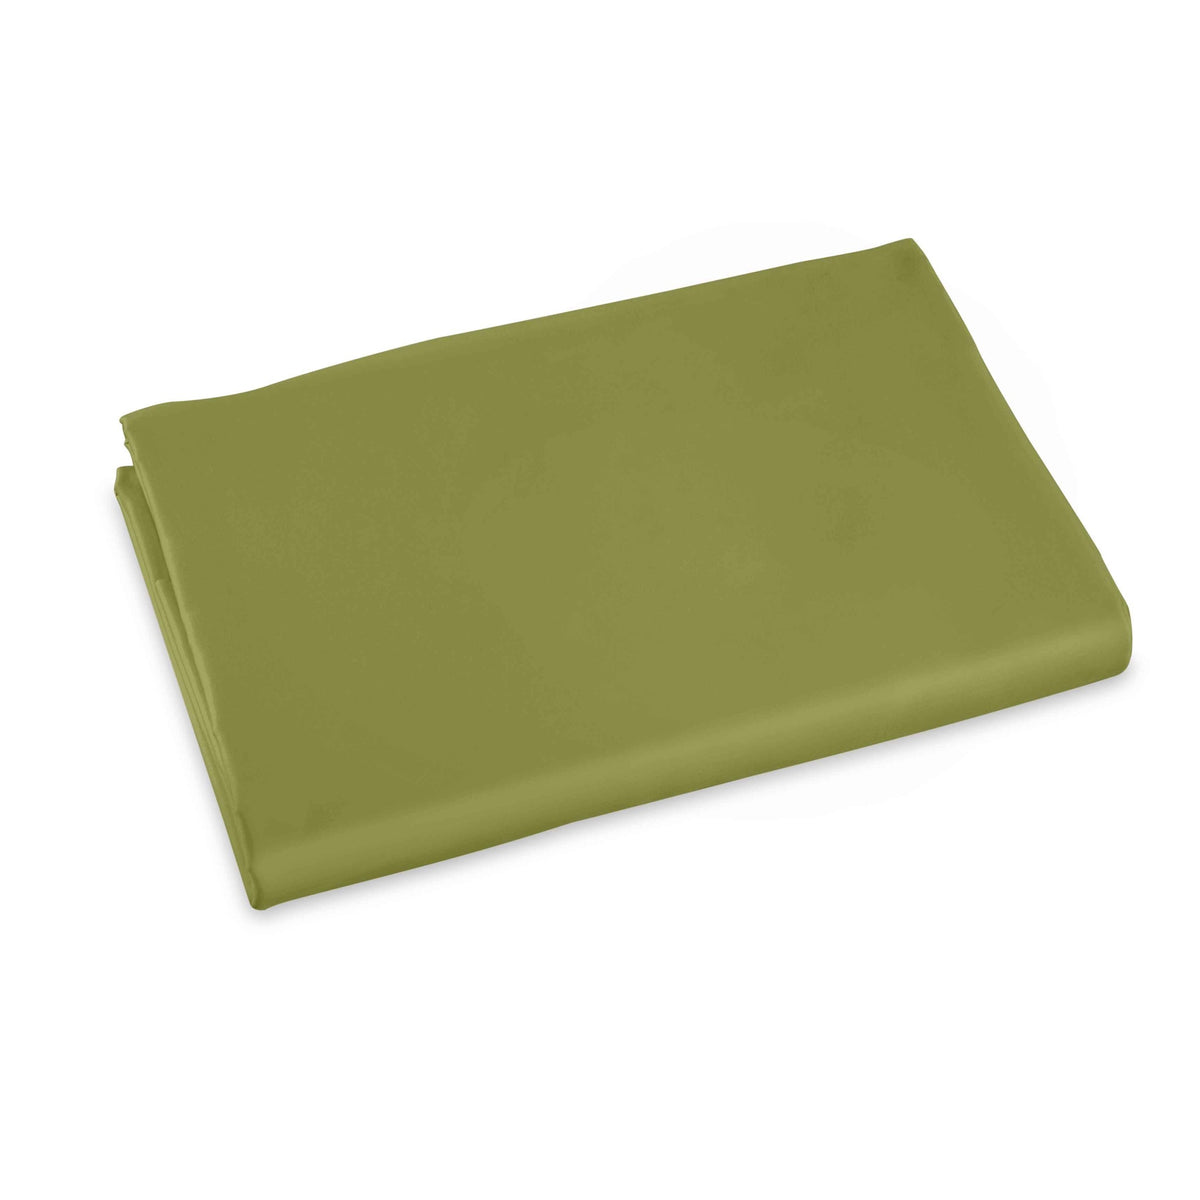 Clear Image of Signoria Raffaello Fitted Sheet in Moss Green Color